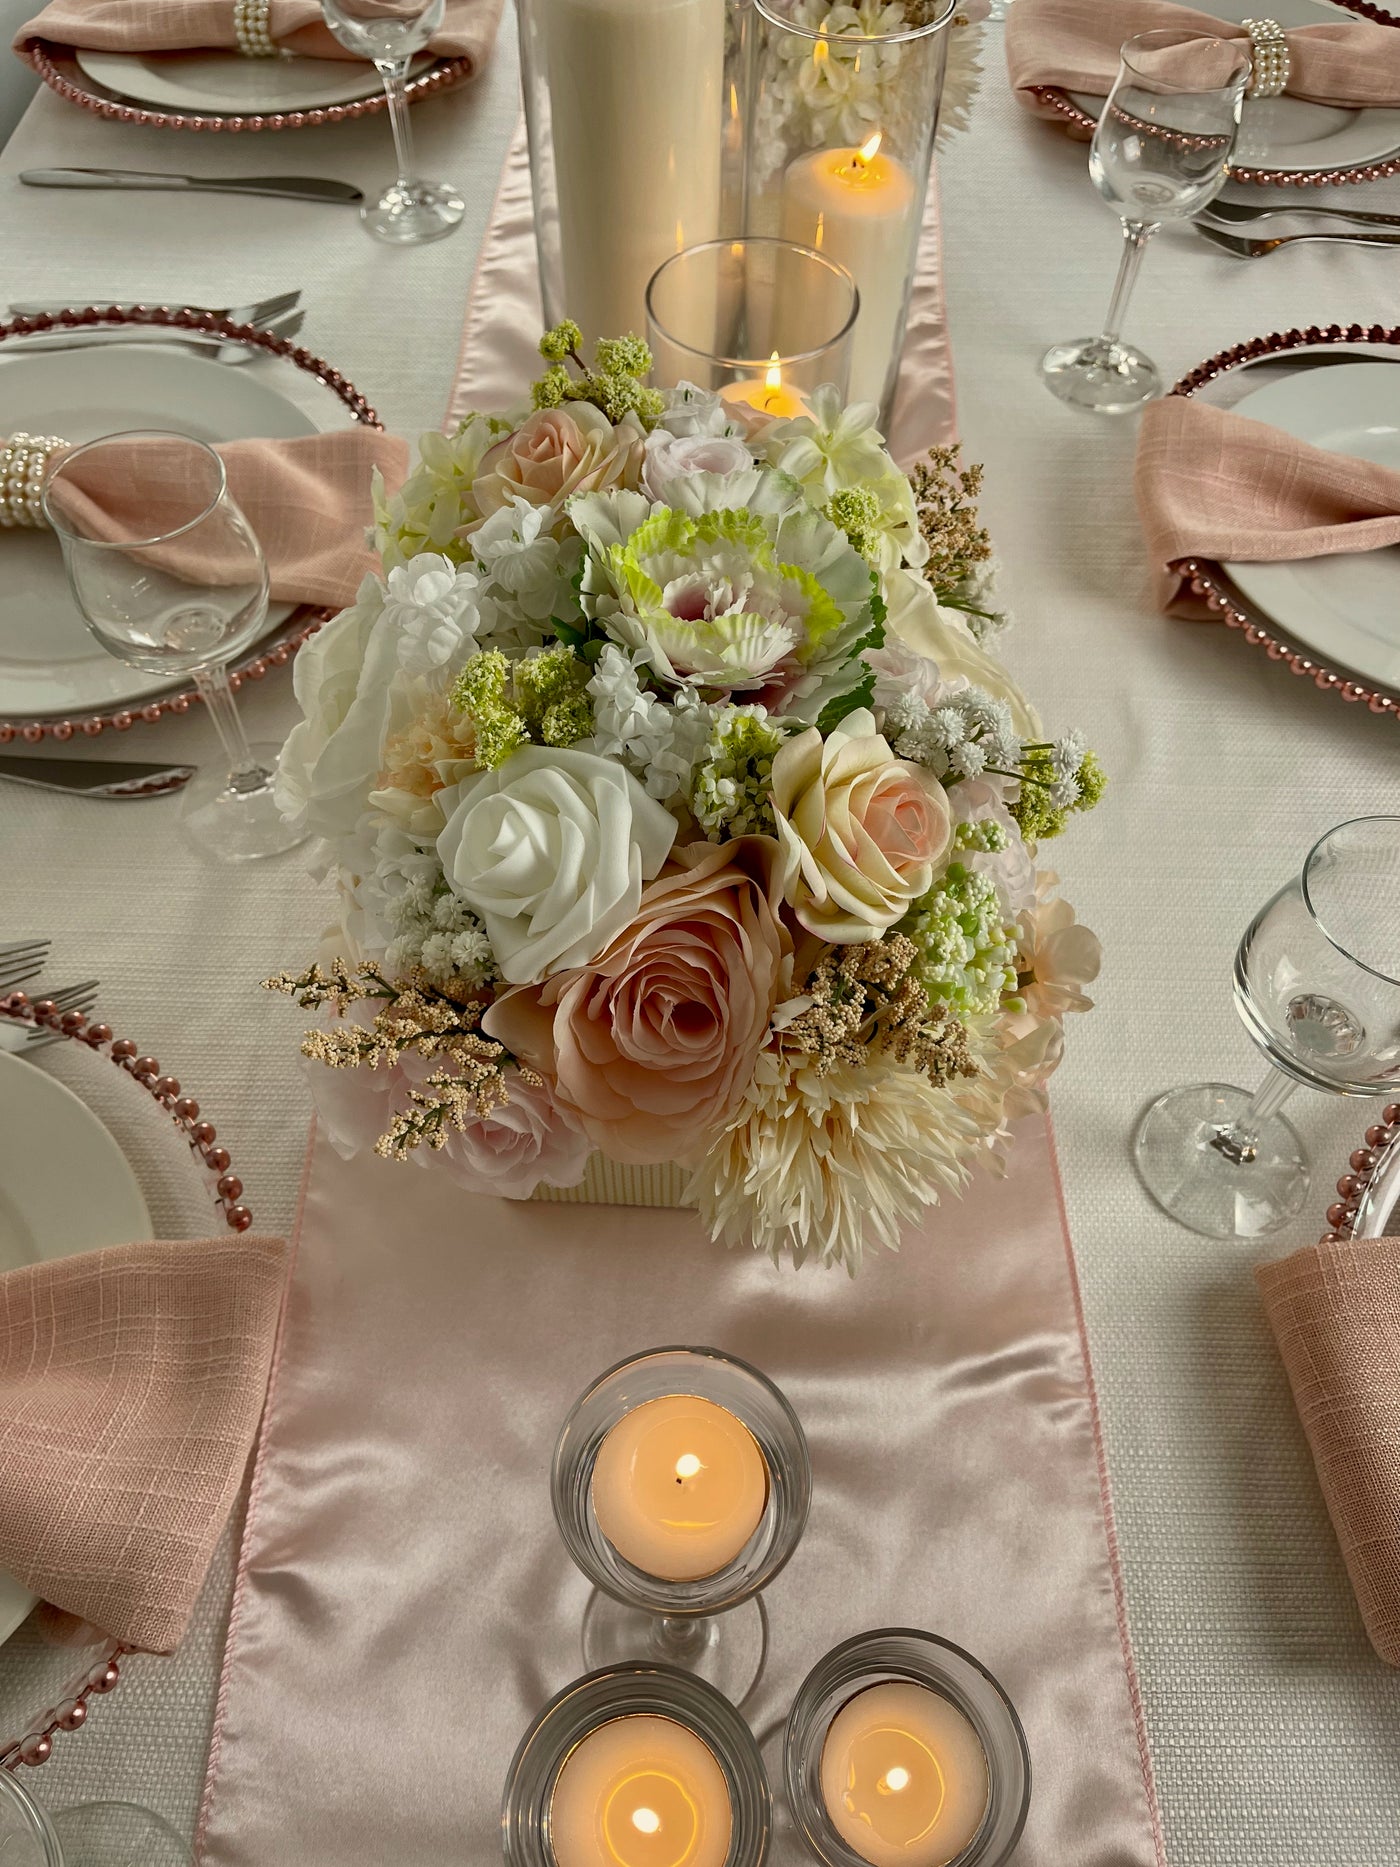 Rent a Rose- Centrepiece- Pink- cream and pale green rent for five days for $20.00